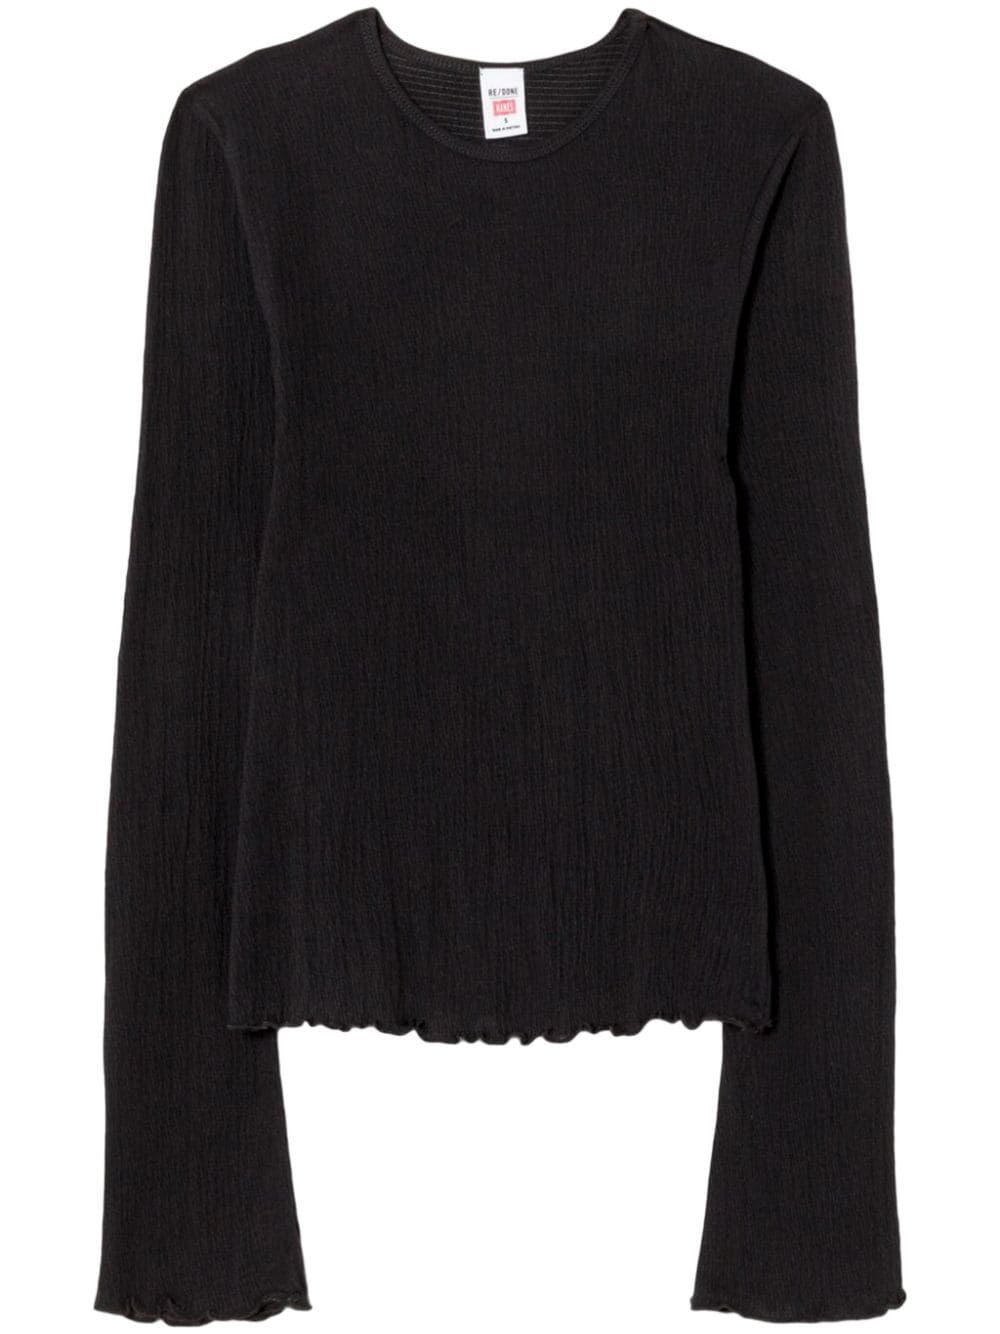 RE/DONE bell-sleeved crinkled top - Black von RE/DONE